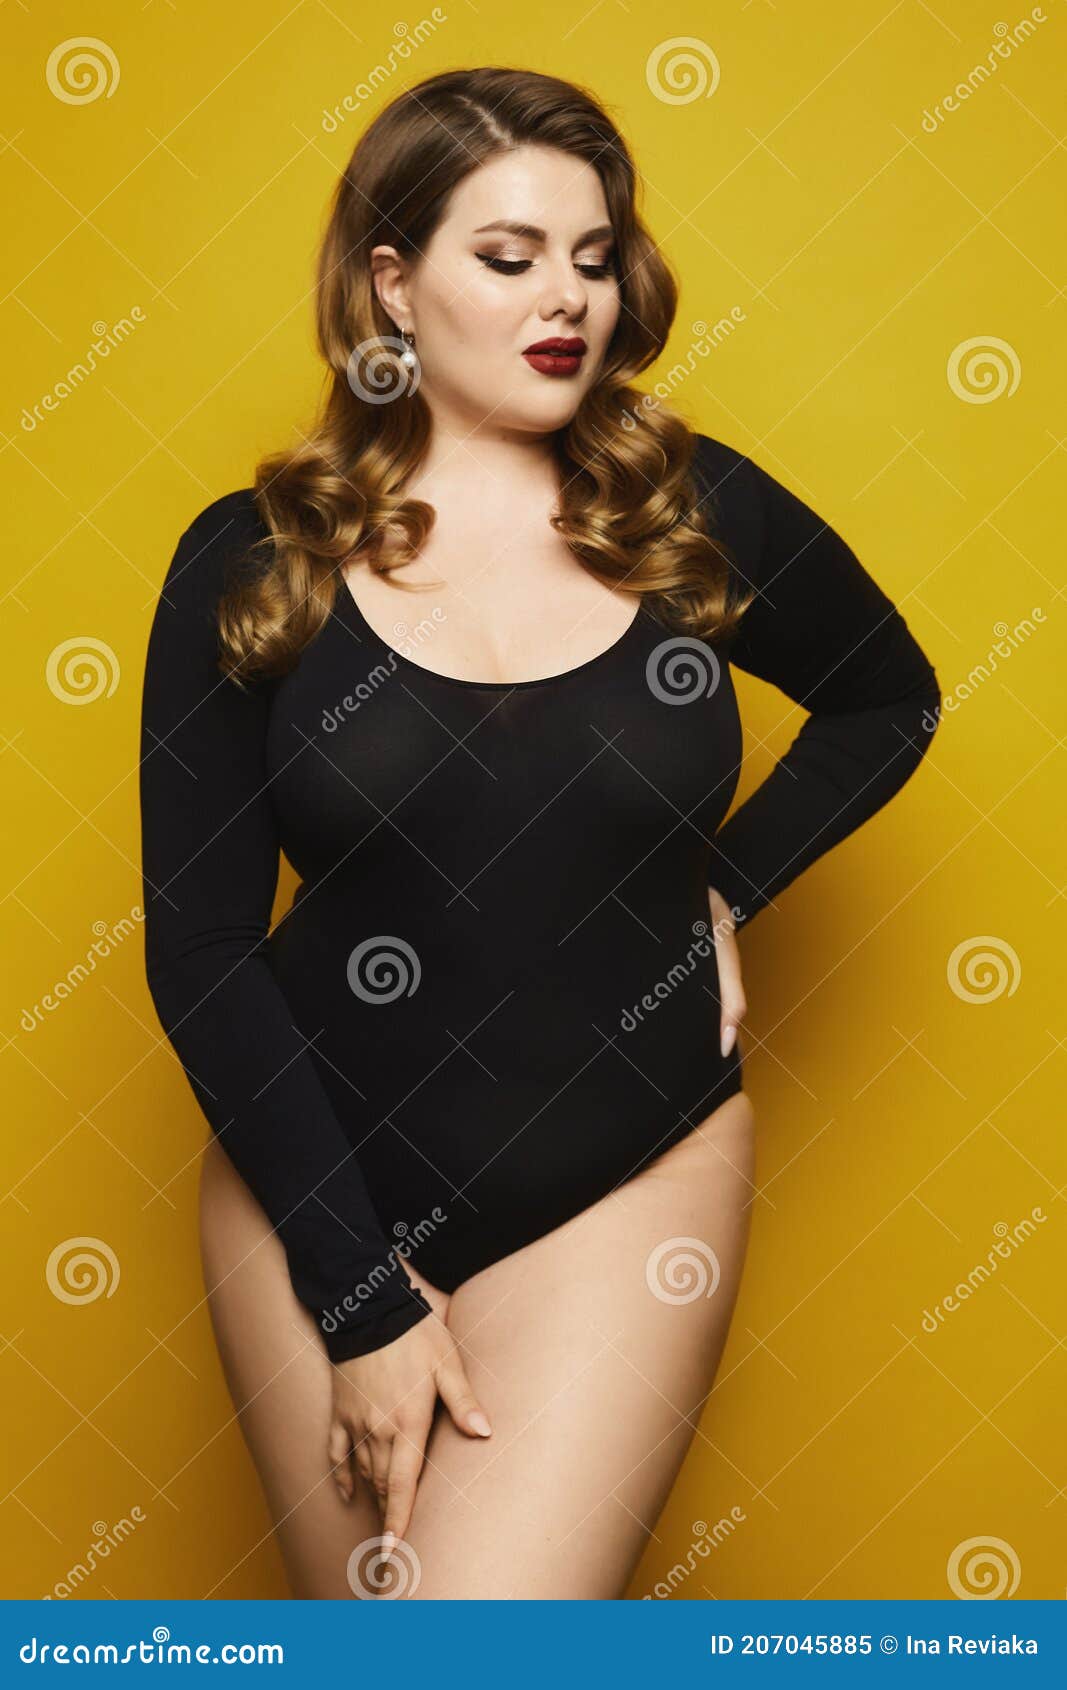 Plump Woman in Black Bodysuit Posing Over Yellow Background. Plus Size  Model Girl with Bright Makeup and Stylish Stock Image - Image of model,  fitness: 207045885